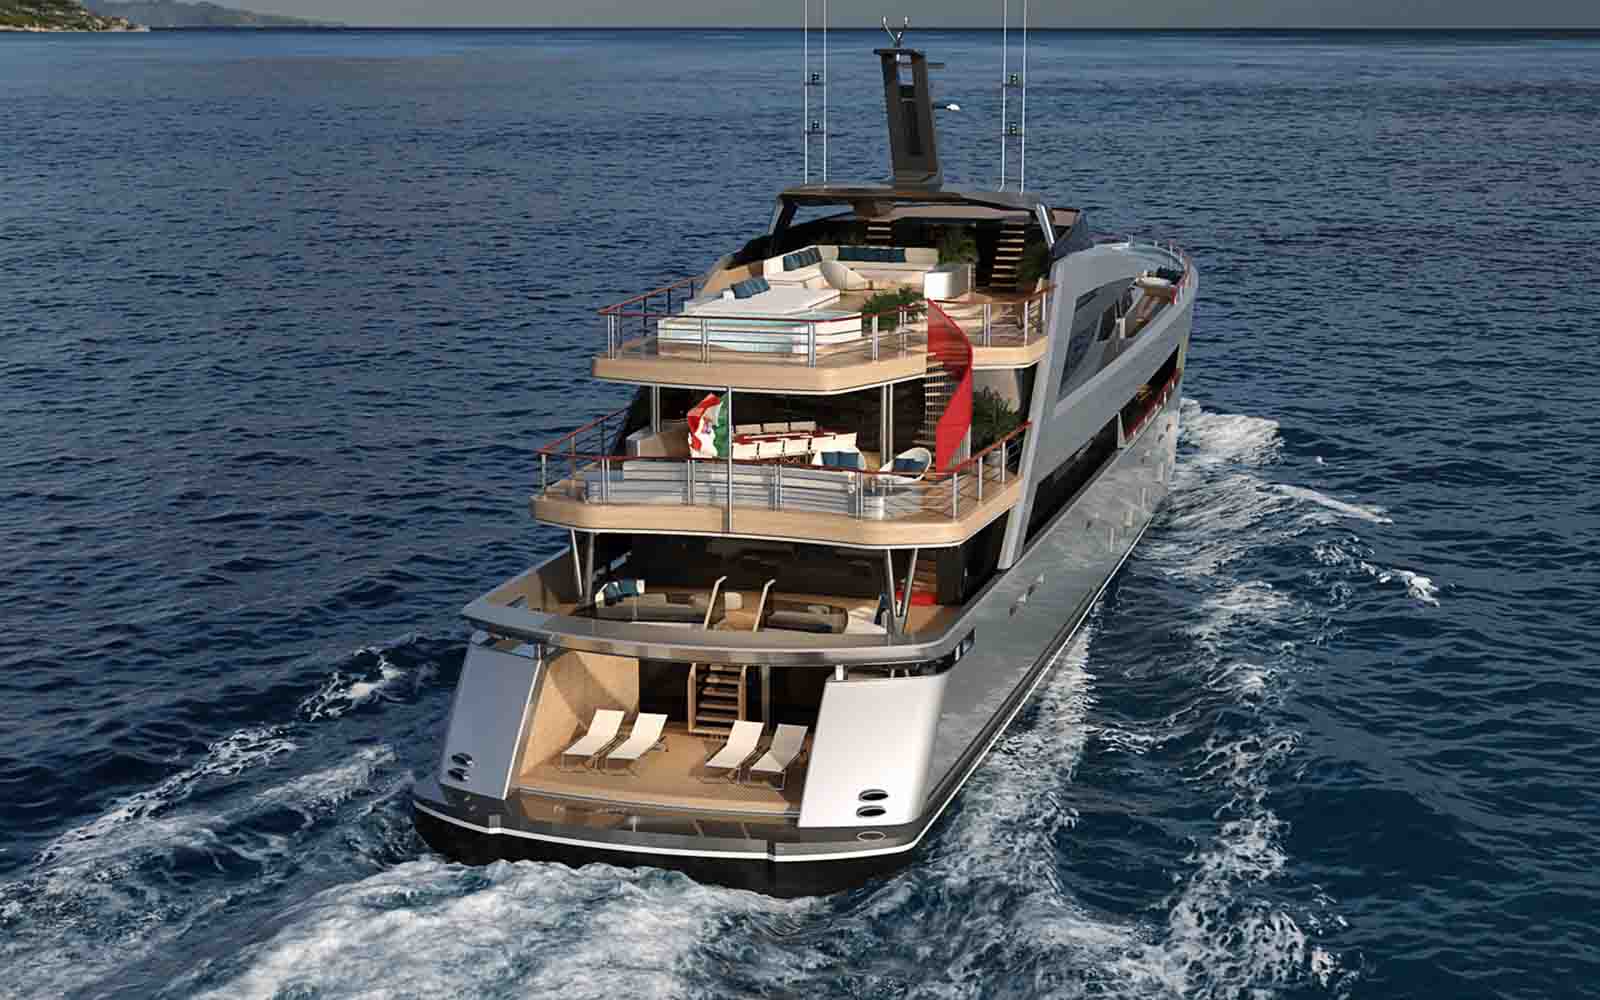 Superyacht conceito Gravity - boat shopping